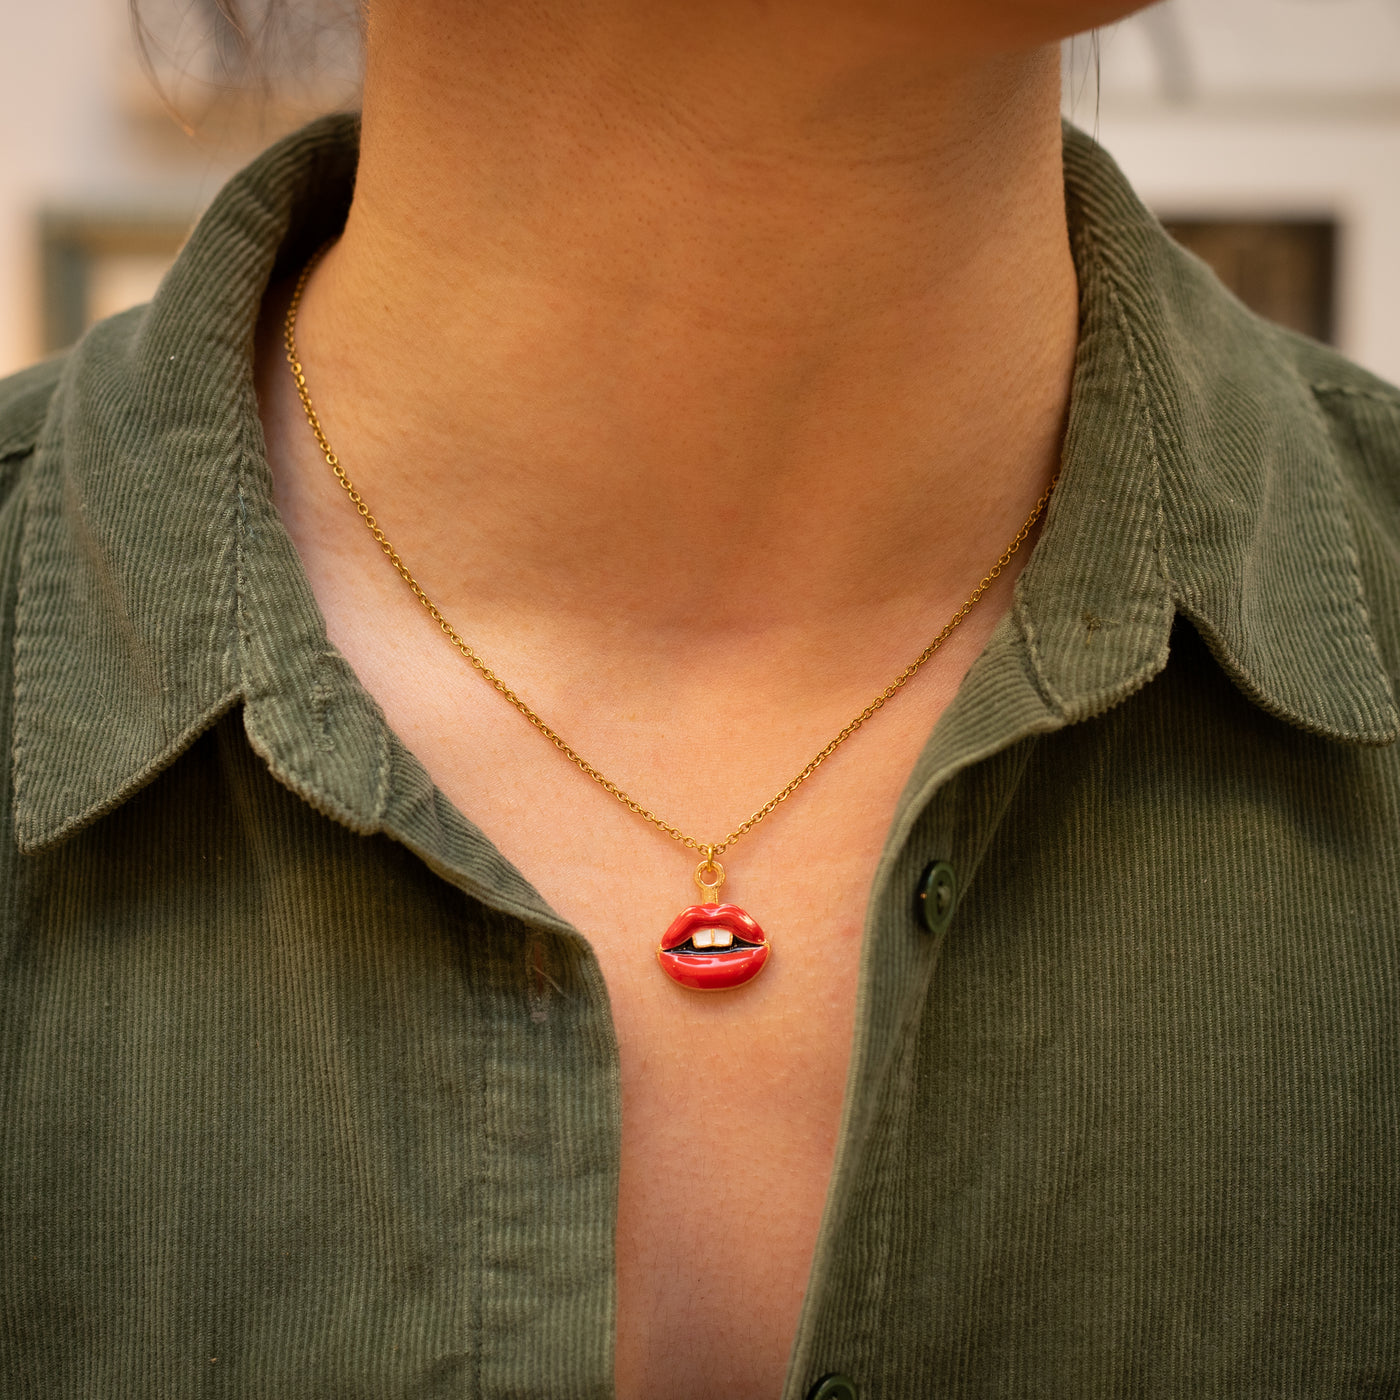 Red Lips Necklace